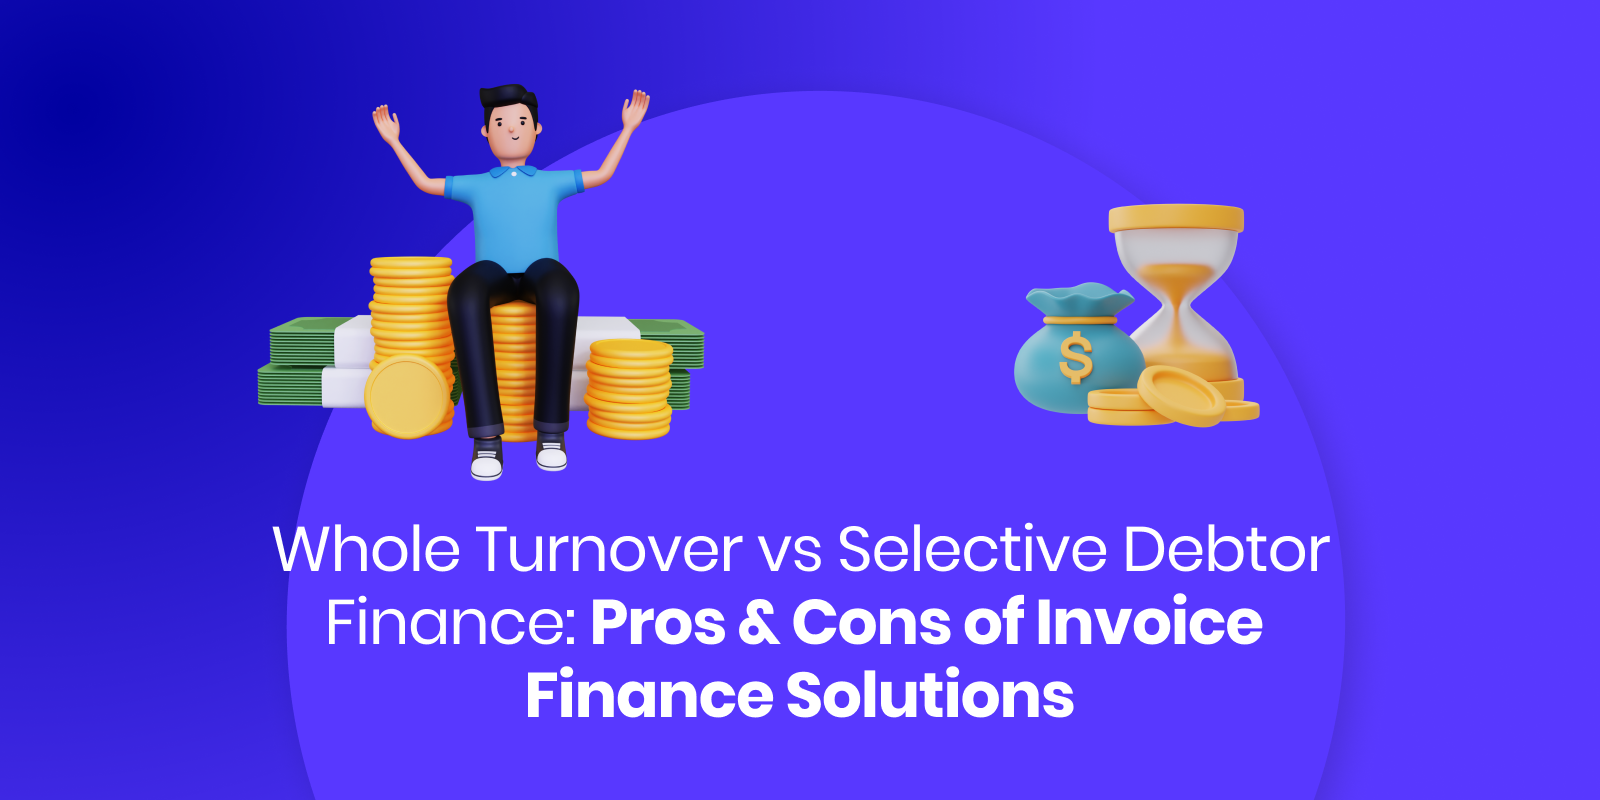 Pros and Cons of Invoice Finance Solutions - Hydr Blog